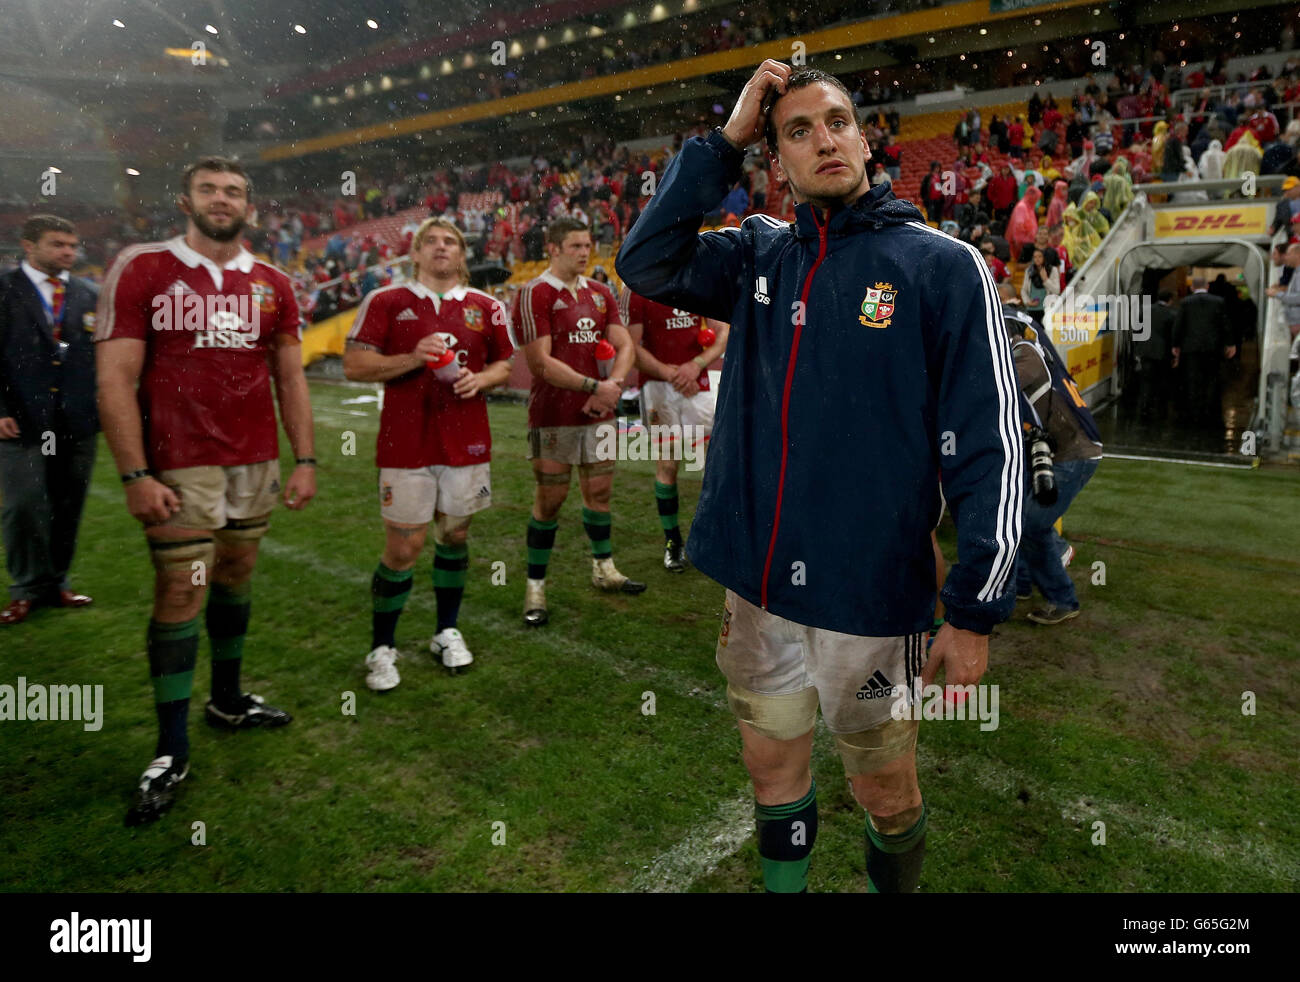 British and Irish Lions Sam Warburton after the final whistle in the British and Irish Lions Tour match at the Suncorp Stadium, Brisbane, Australia. PRESS ASSOCIATION Photo. Picture date: Saturday June 8, 2013. See PA story RUGBYU Lions. Photo credit should read: David Davies/PA Wire. RESTRICTIONS: , Non-commercial use, Photographs cannot be altered or adjusted other than in the course of normal journalistic or editorial practice (including cropping/manipulation for purpose of formatting or superimposition of captions/headings). Call 44 (0)1158 447447 for further information. Stock Photo